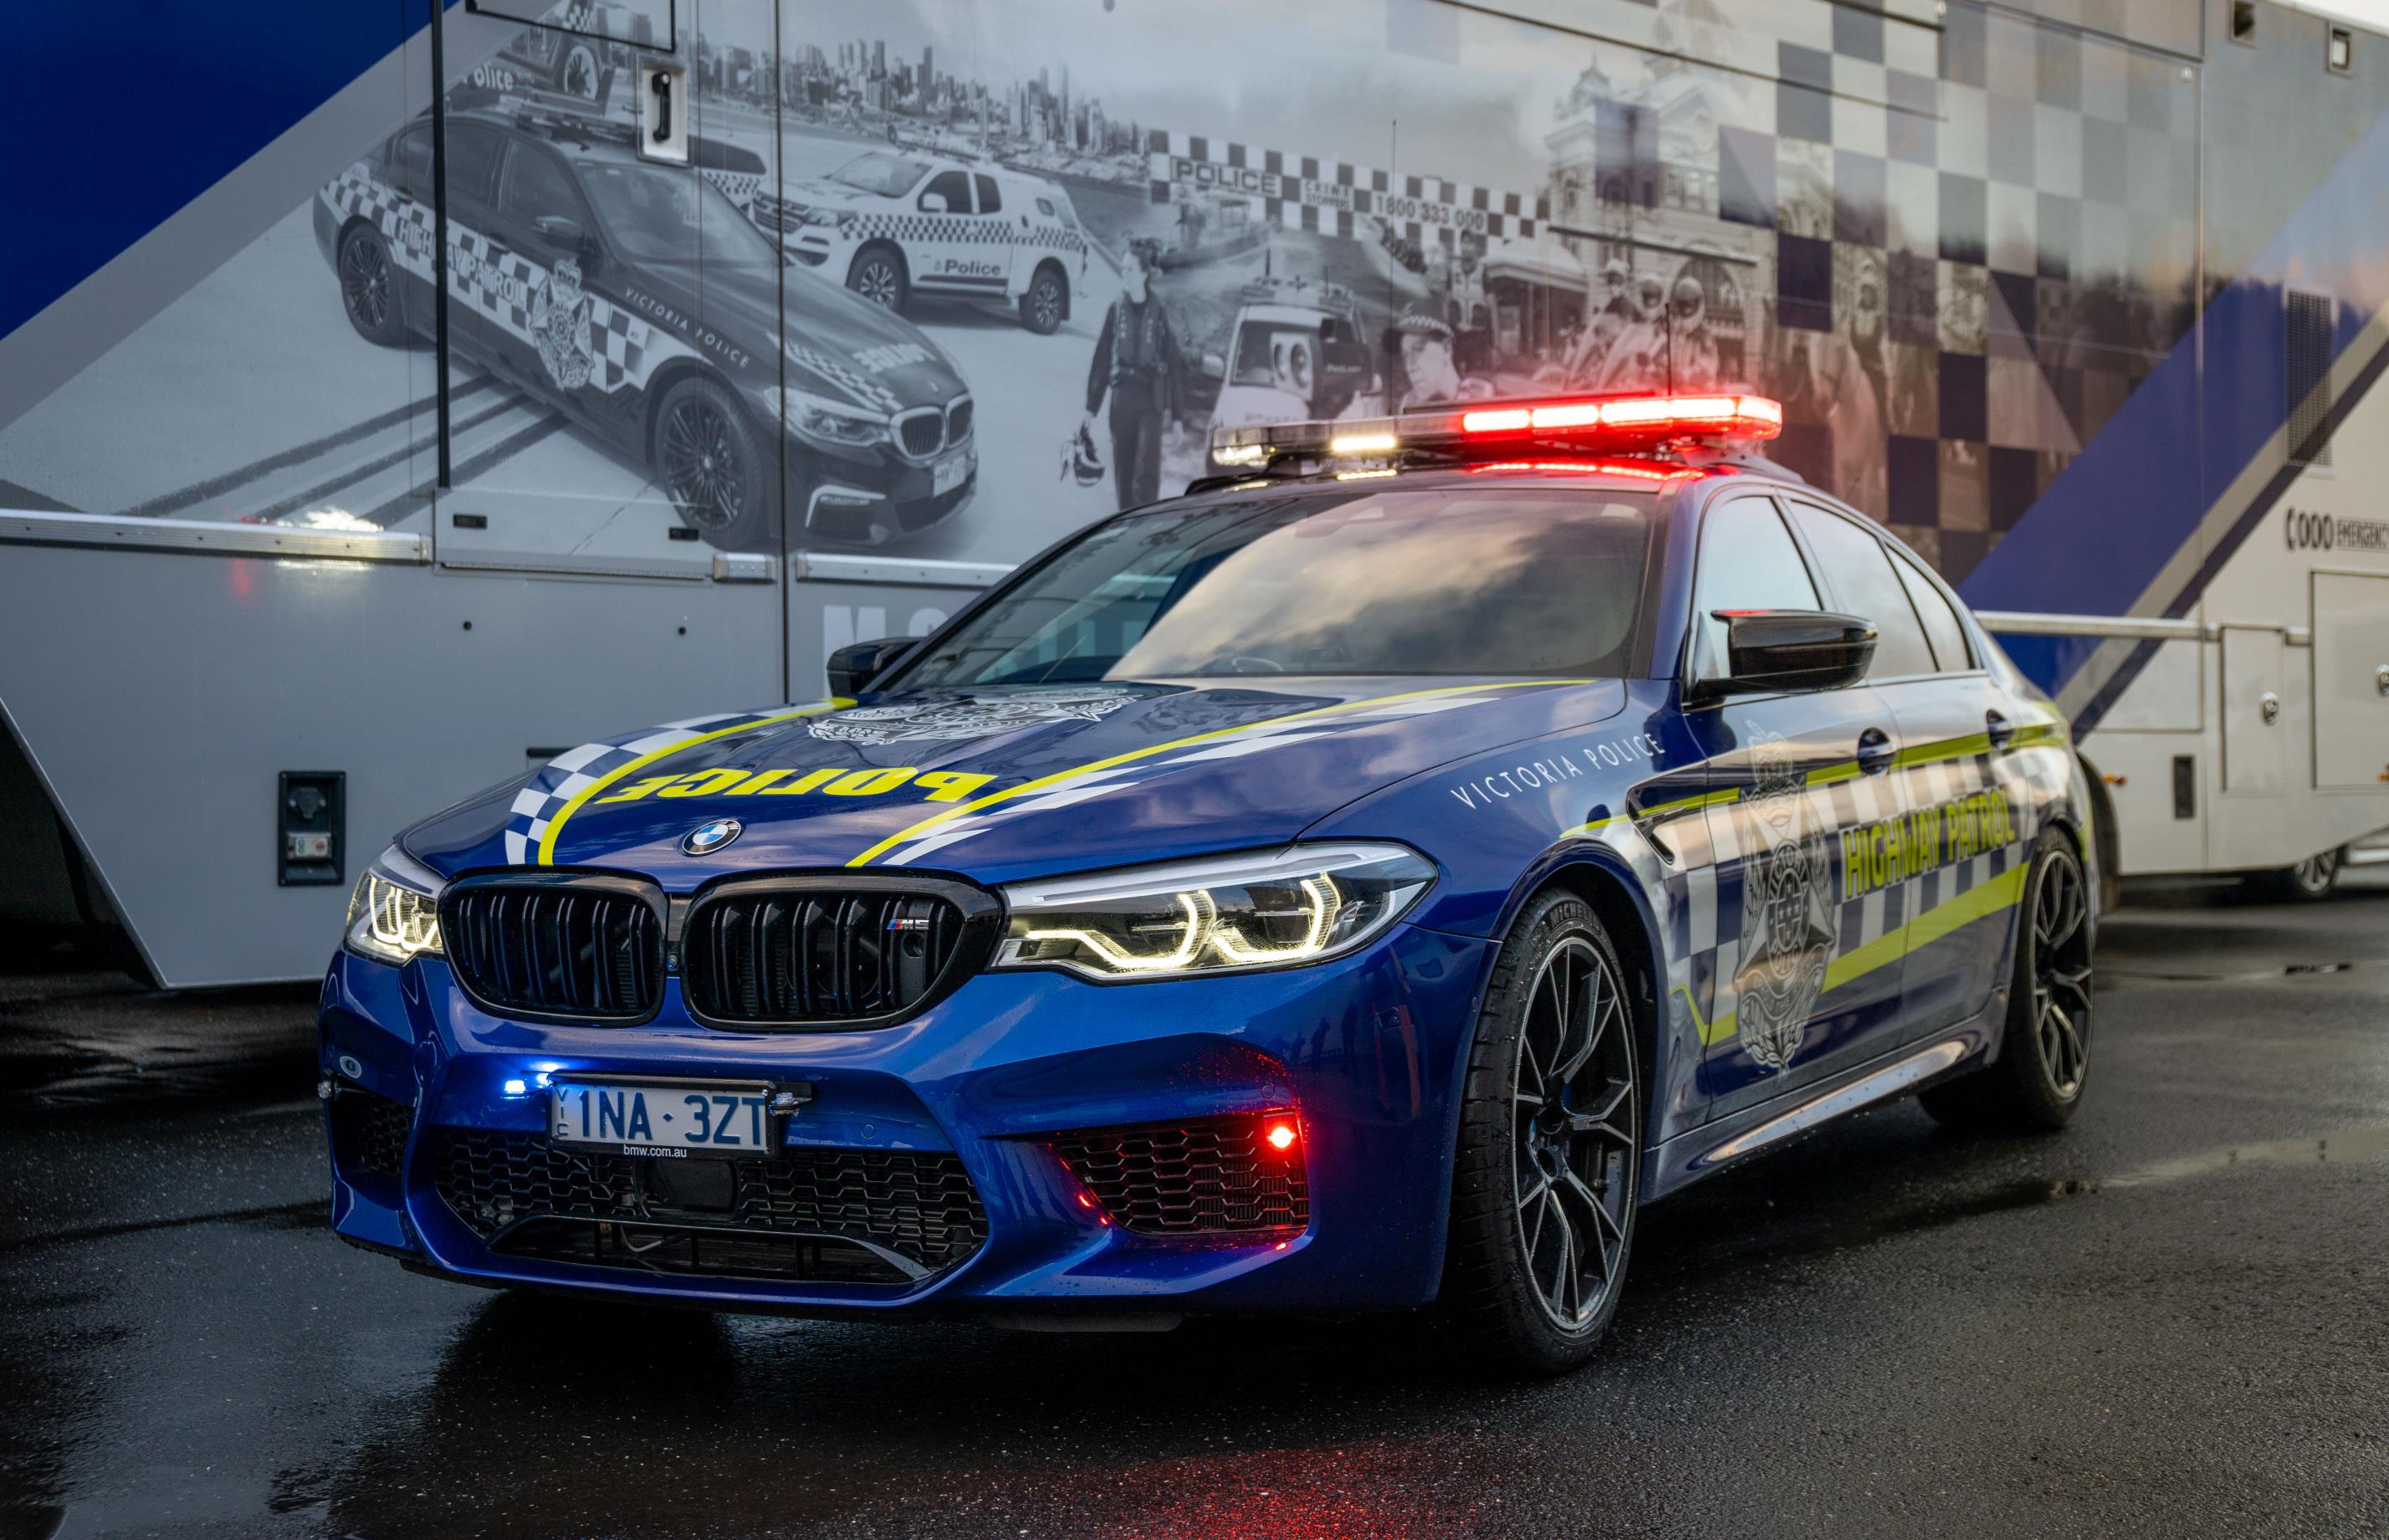 Is this Australia’s fastest police car?